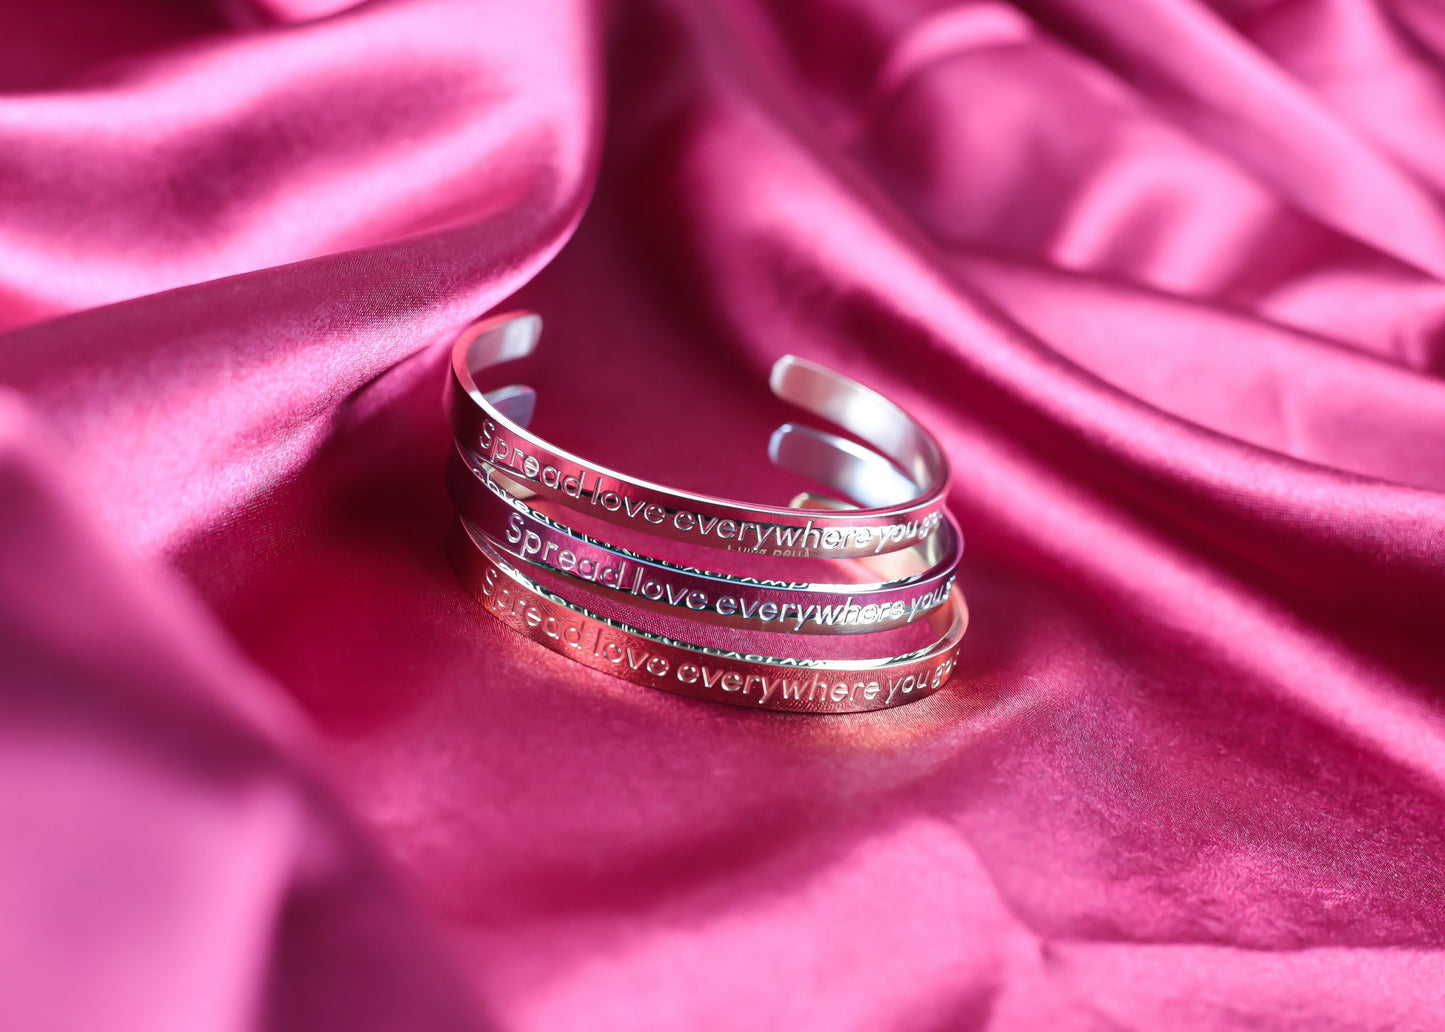 Spread Love Everywhere You Go: Stainless Steel Bracelet with Engraved Text